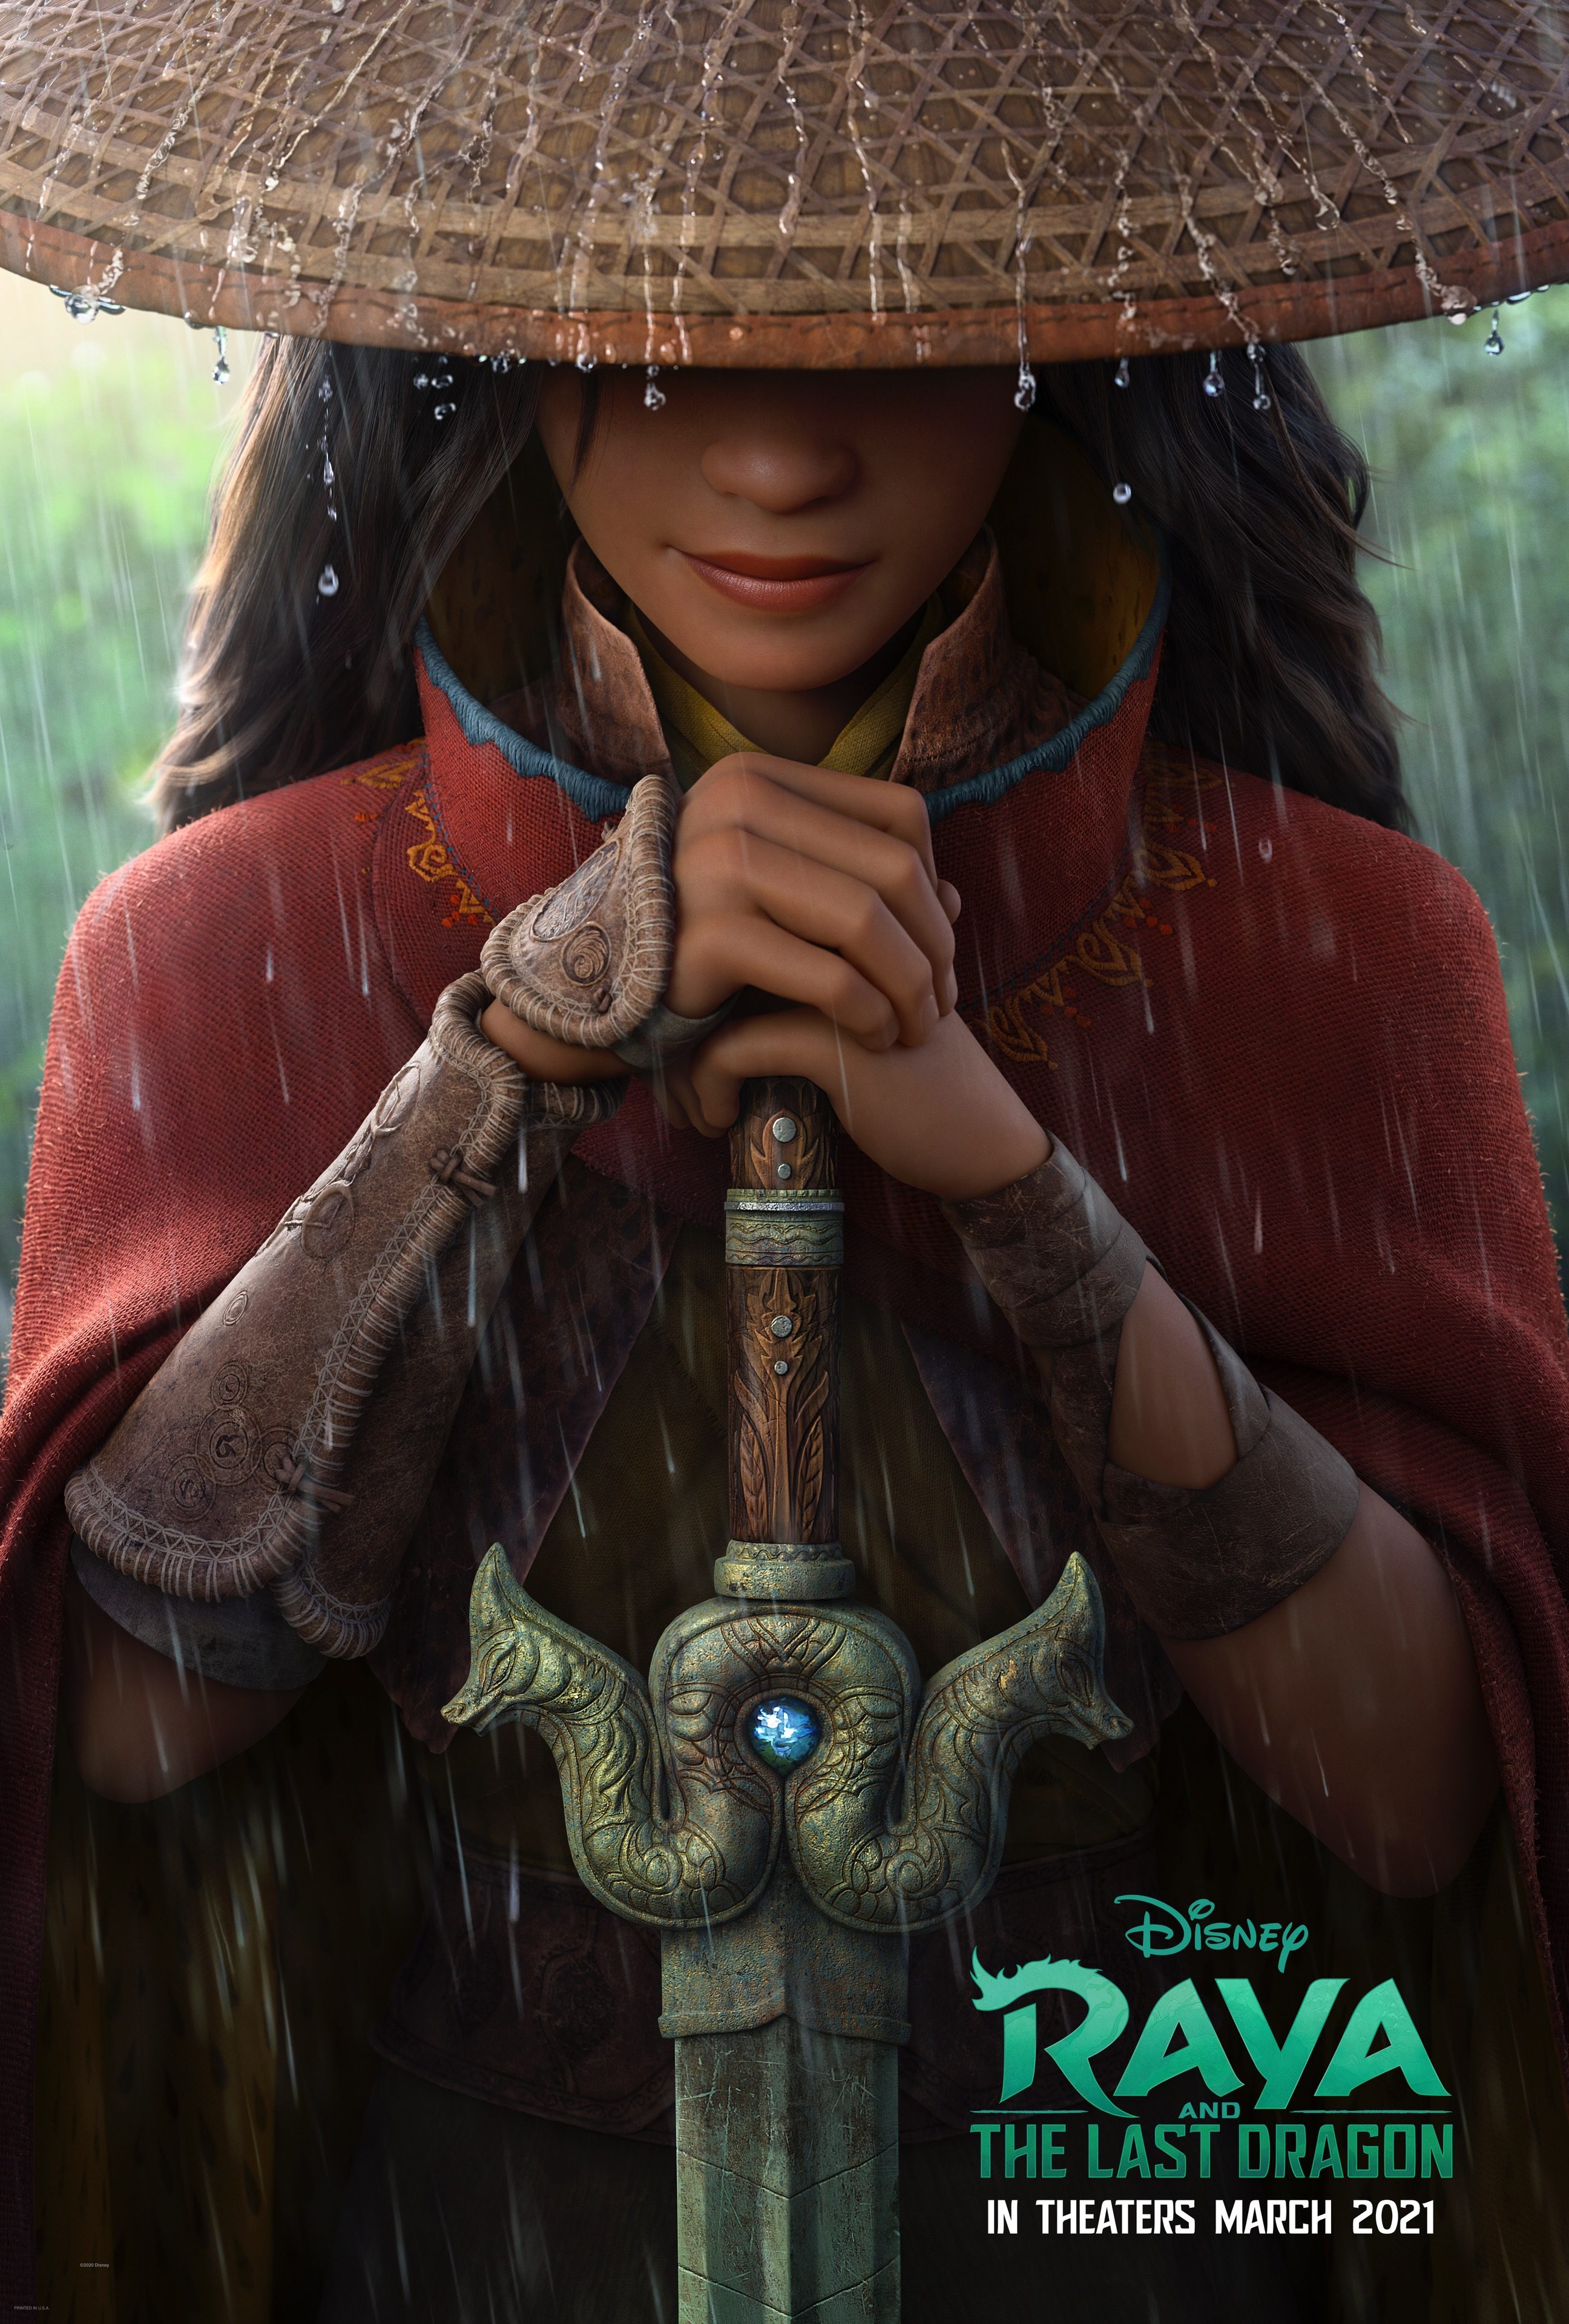 LOOK: Disney unveils poster for ‘Raya and The Last Dragon’